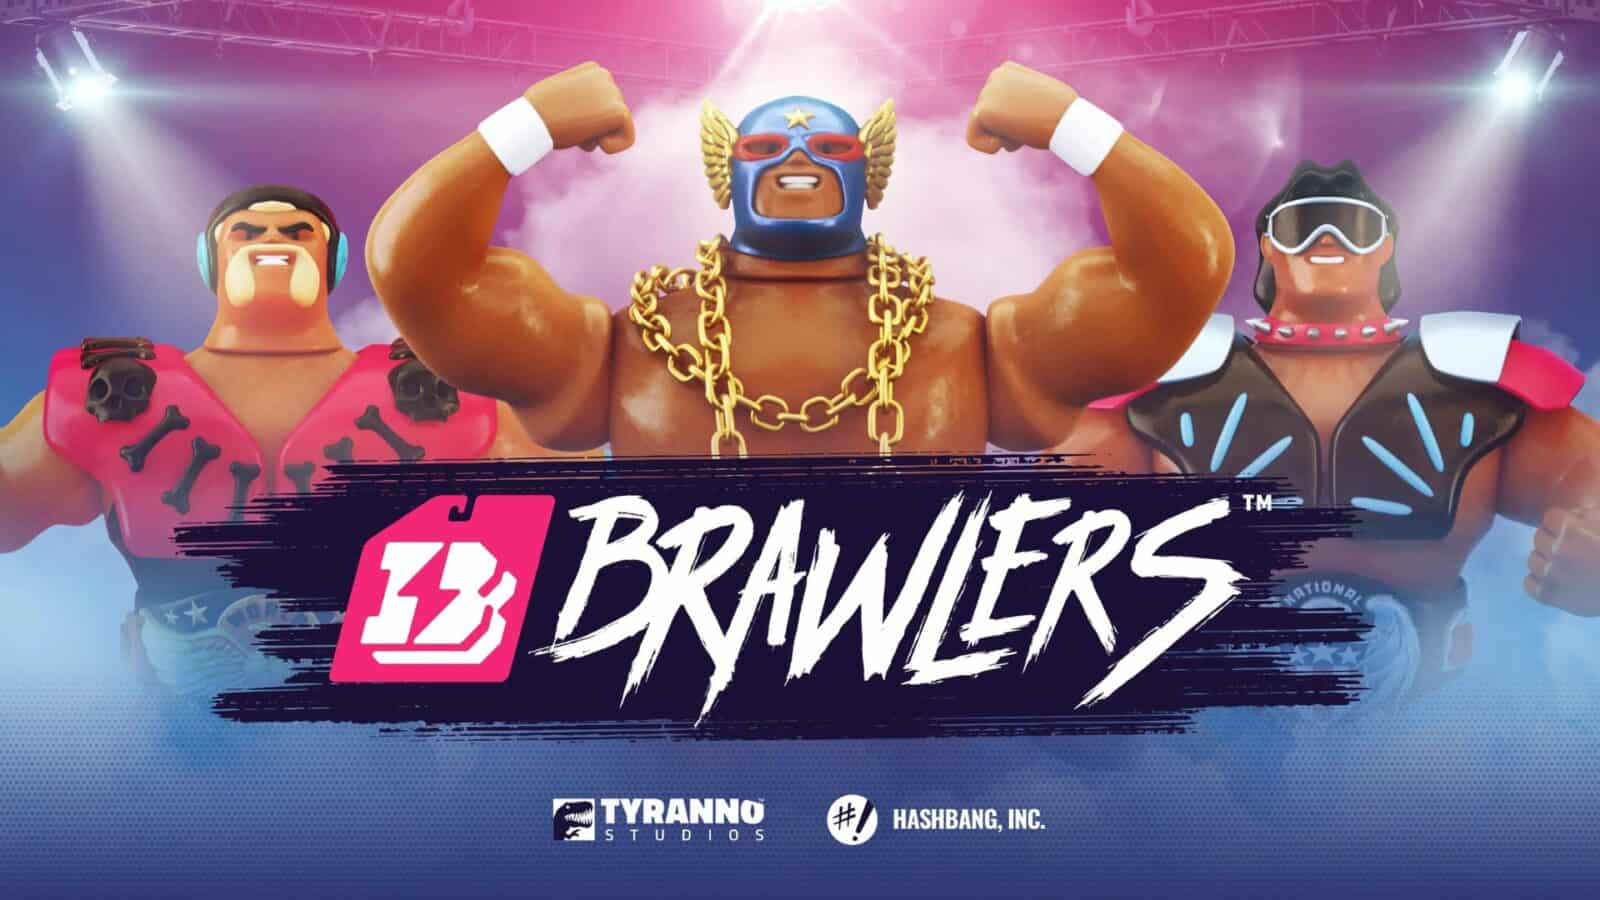 Brawlers: The Next-Gen Web3 Combat Game Gets a Refreshing Makeover